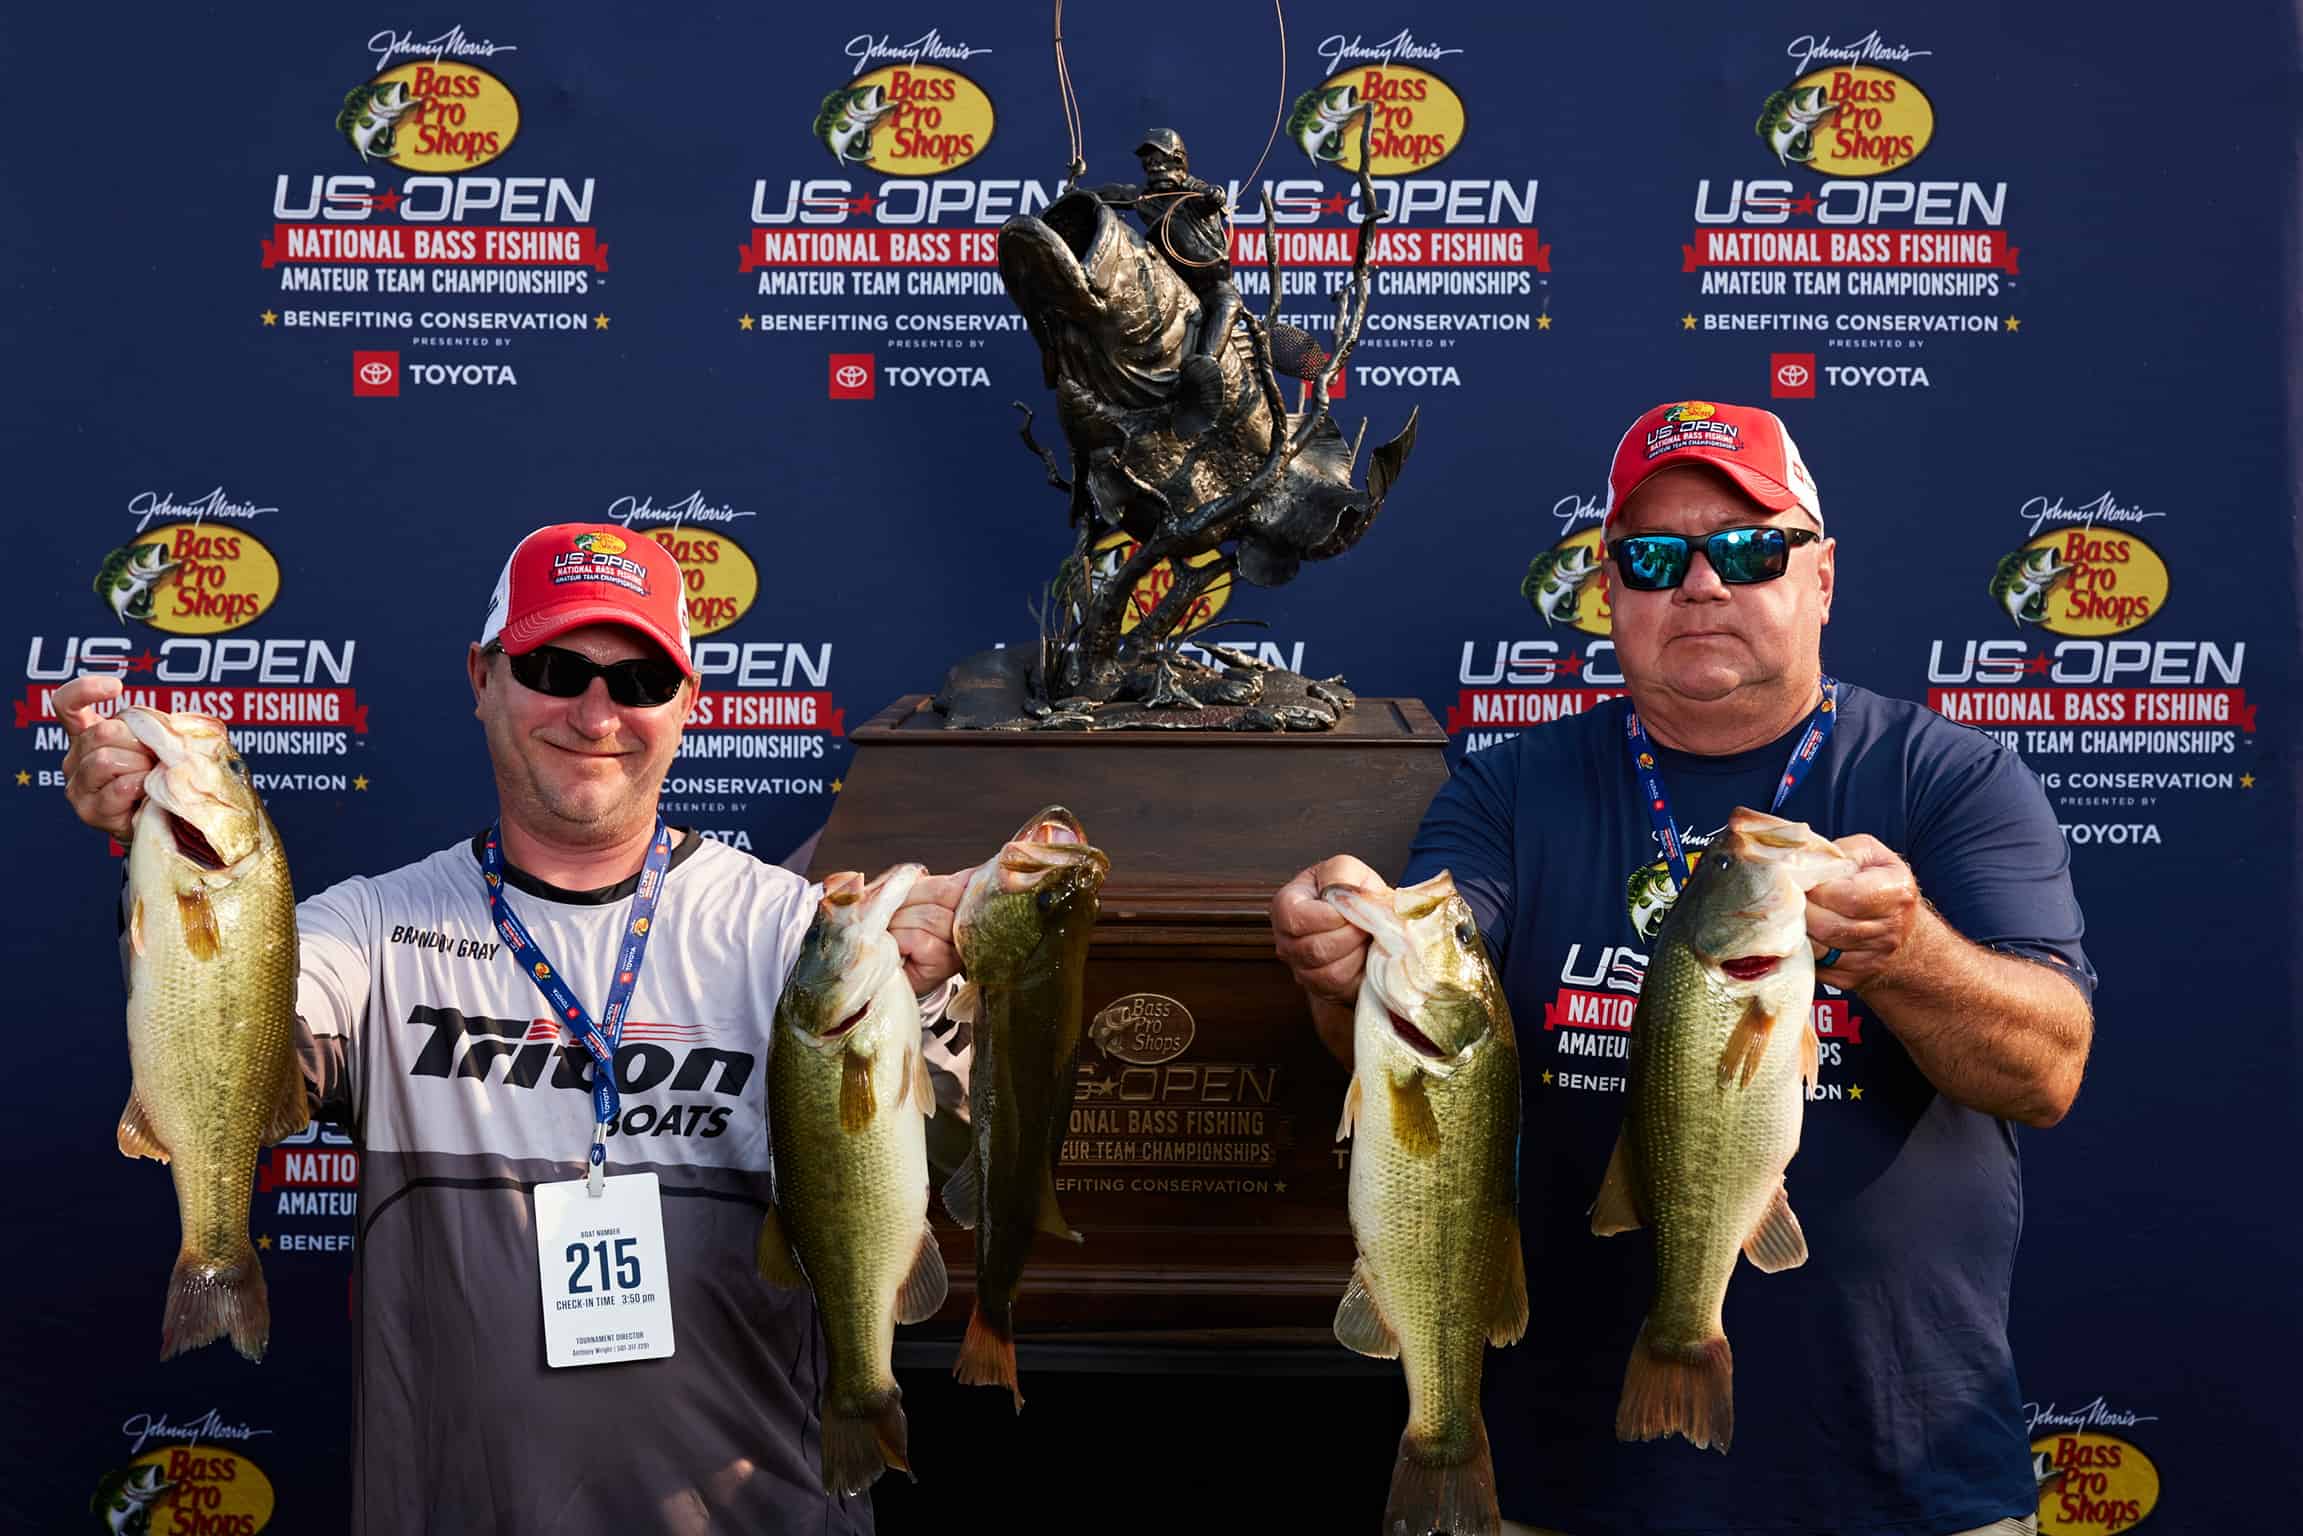 North Carolina Team Collects $50,000 First-Place Check at Bass Pro Shops US  Open Regional Qualifying Event in Nashville - Bass Pro